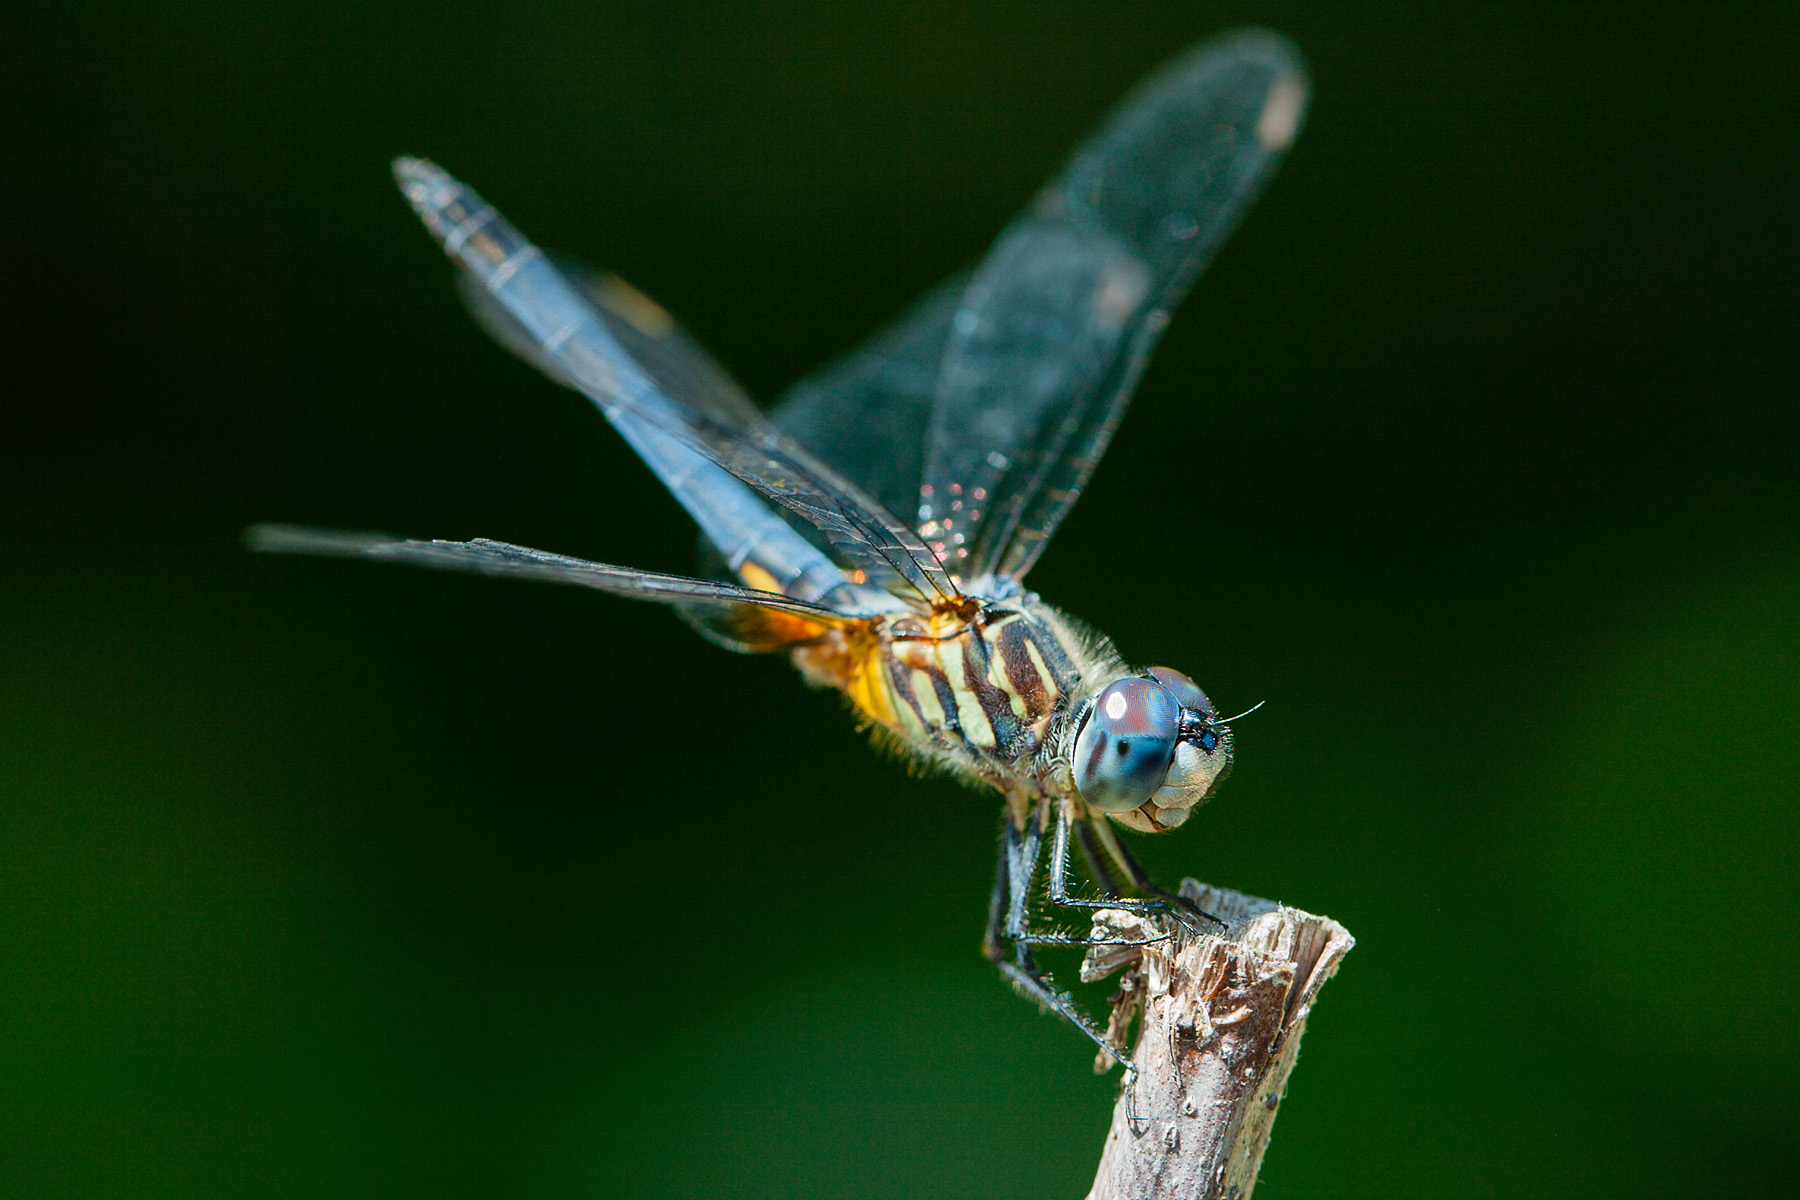 Right after I got my digital SLR, this dragonfly let me test it out by taking an extended rest in my back yard.  Click for next photo.